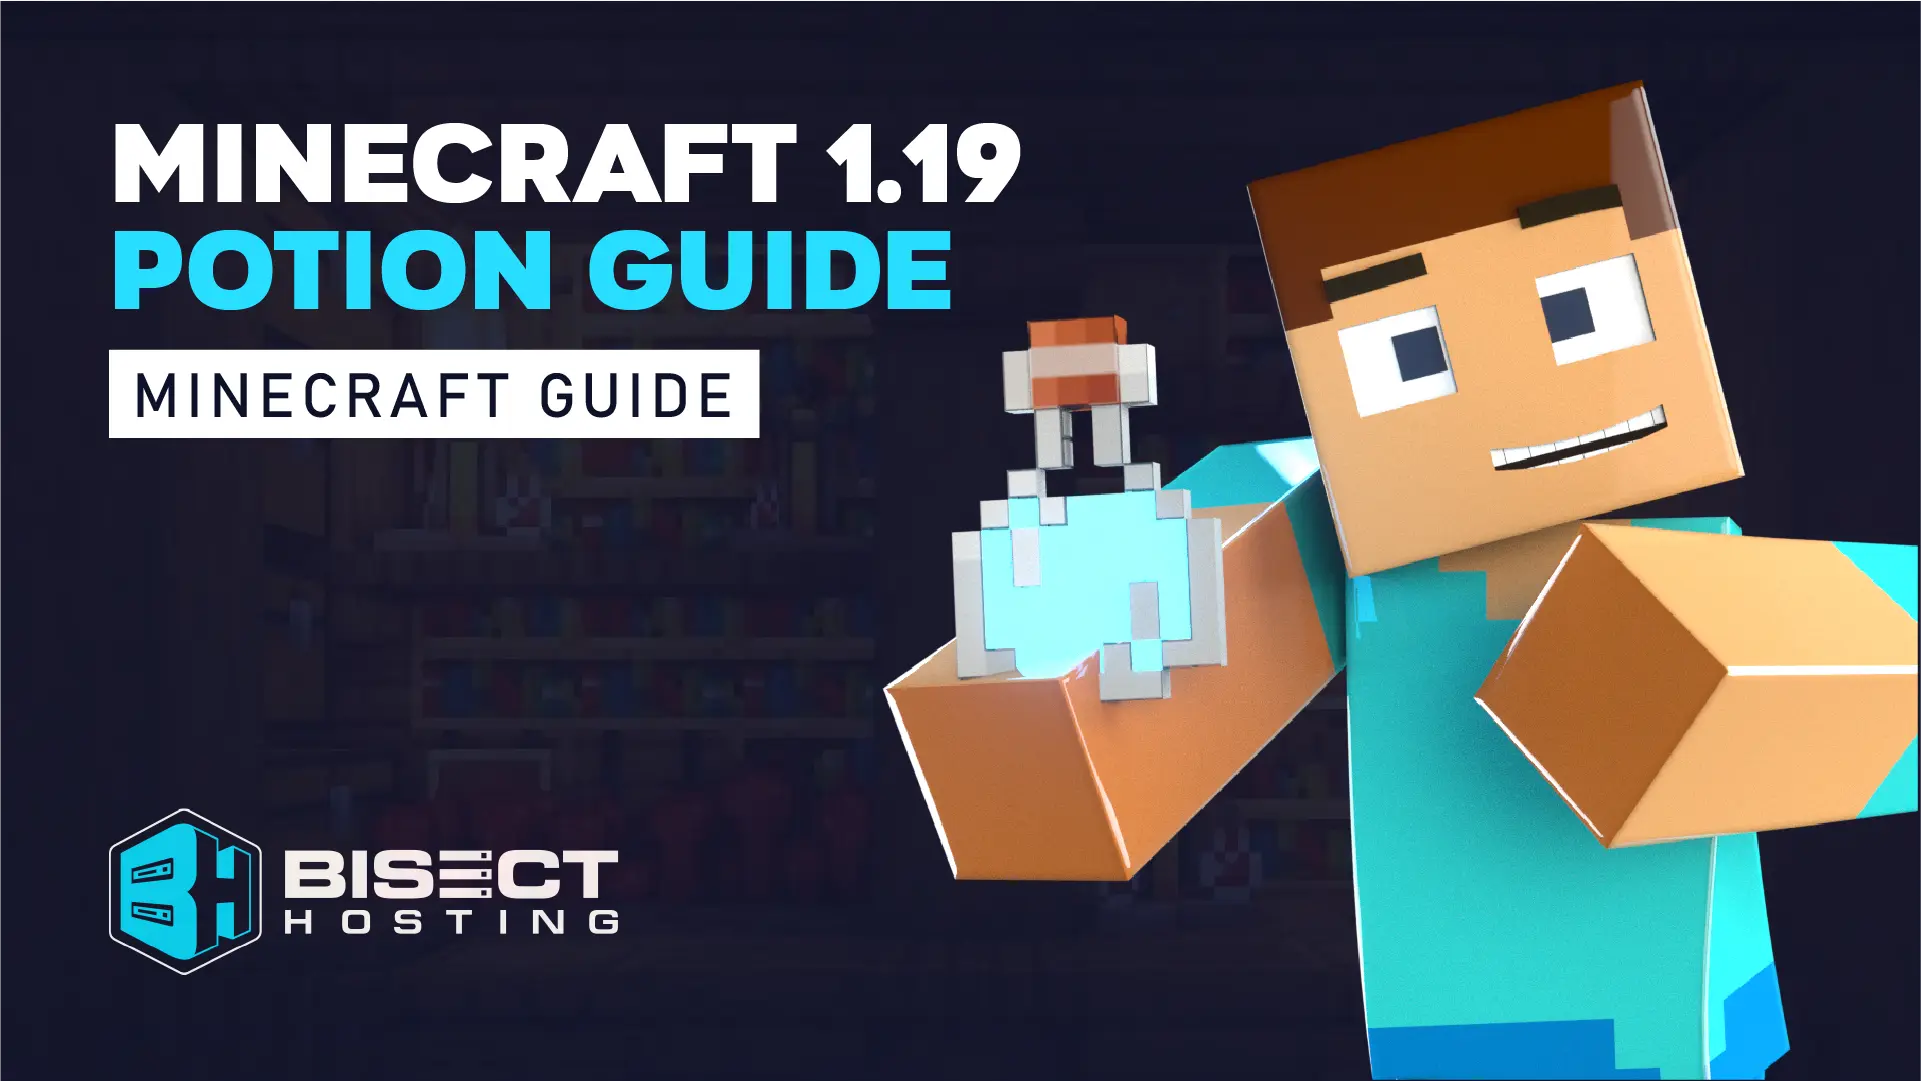 Minecraft 1.19 Potion Guide